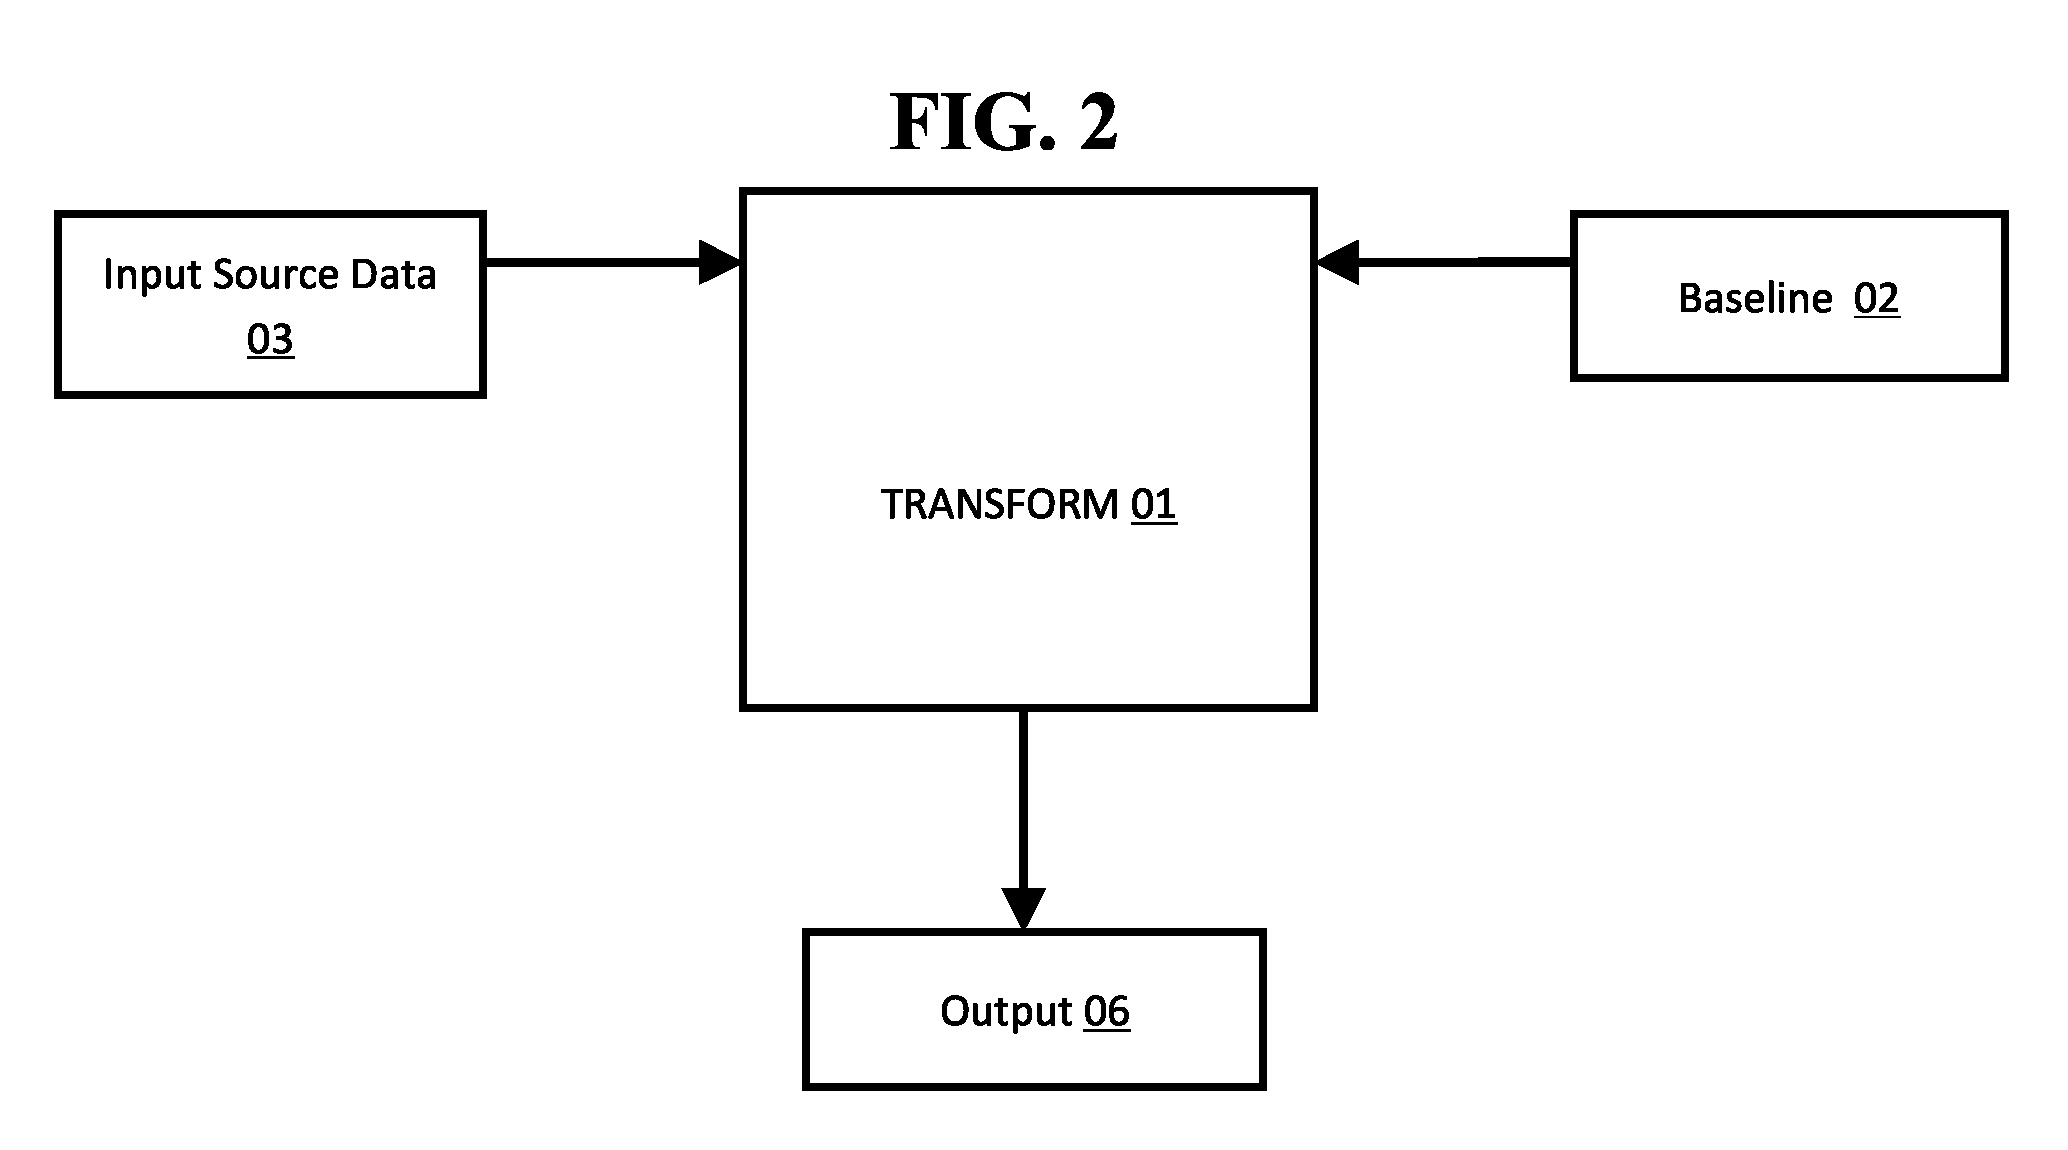 Variable substitution data processing method